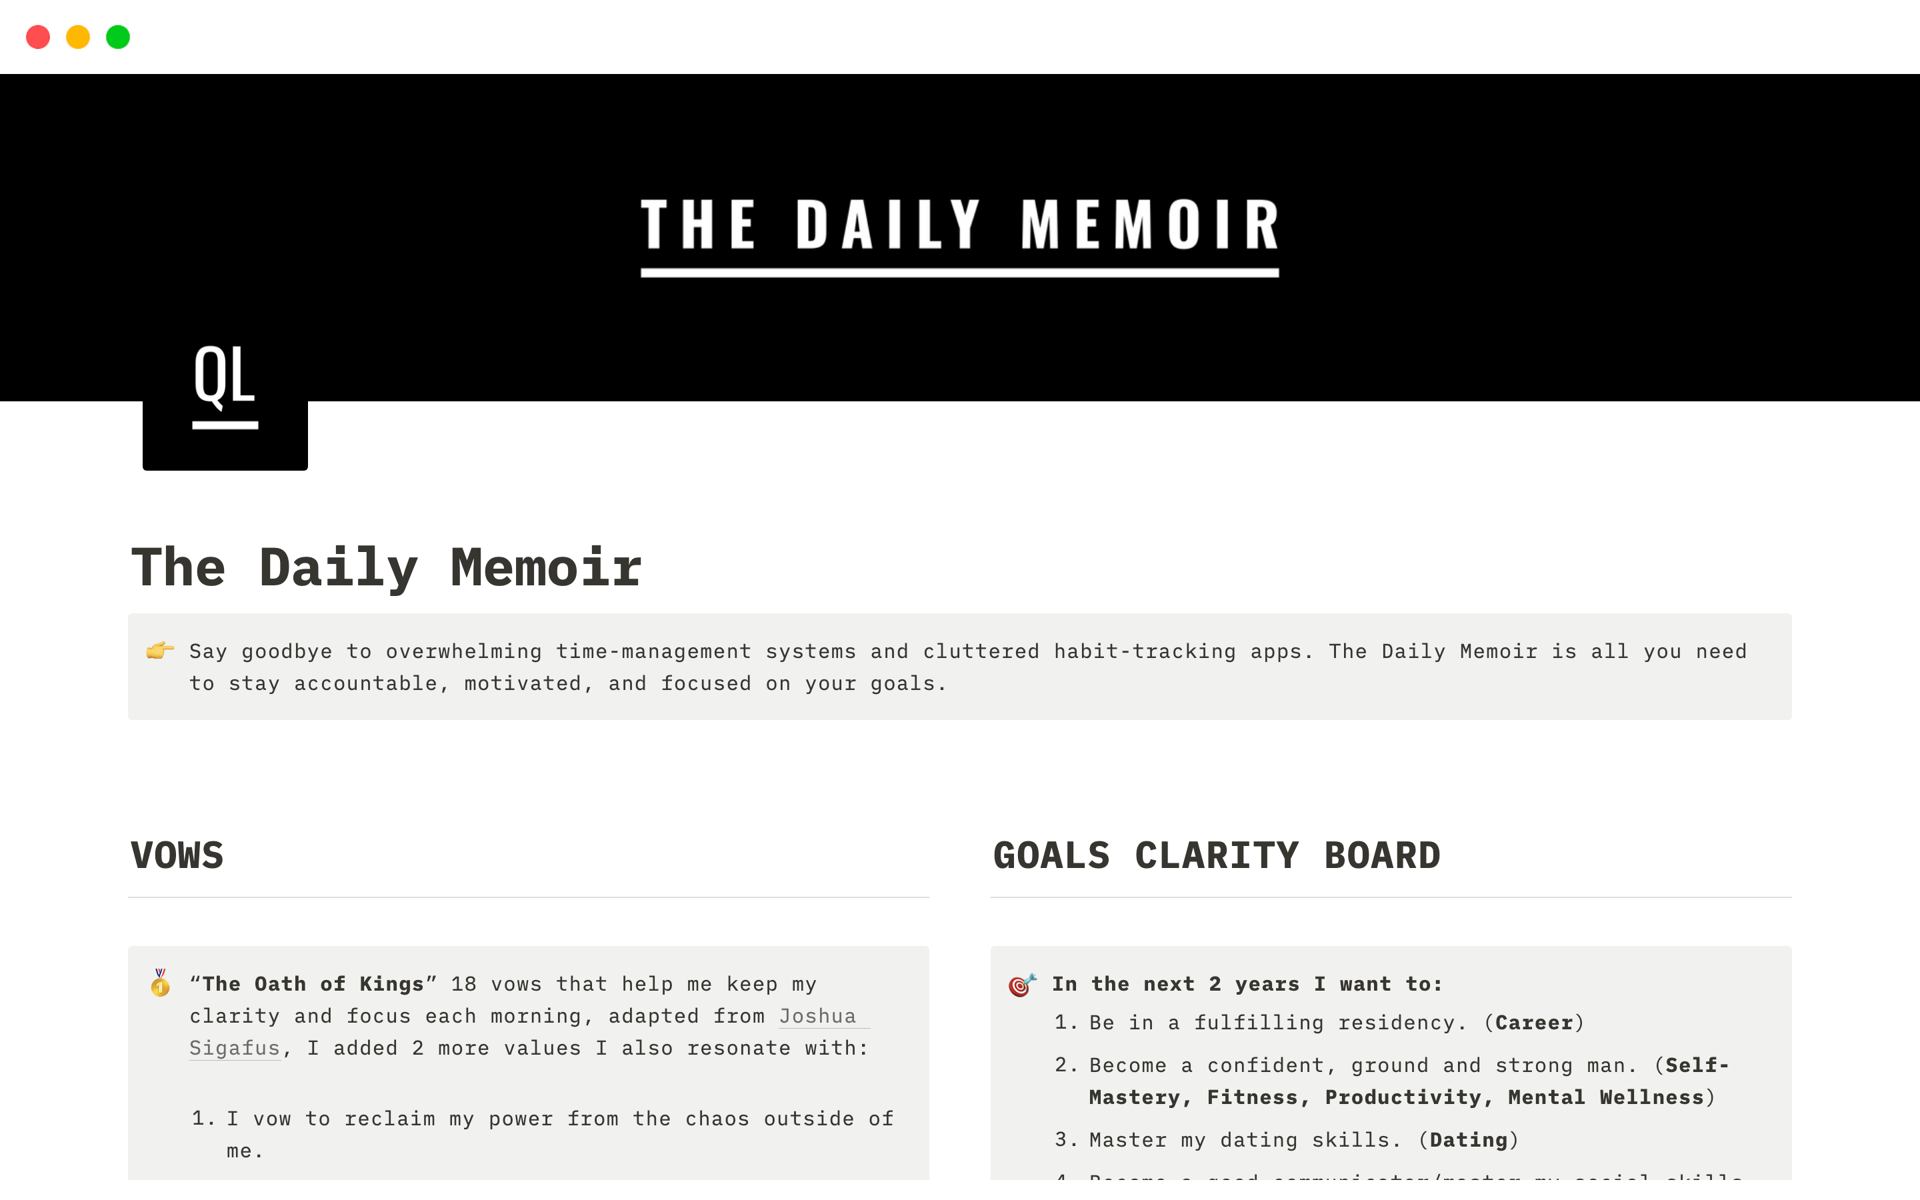 Say goodbye to overwhelming time-management systems and cluttered habit-tracking apps. The Daily Memoir is all you need to stay accountable, motivated, and focused on your goals.